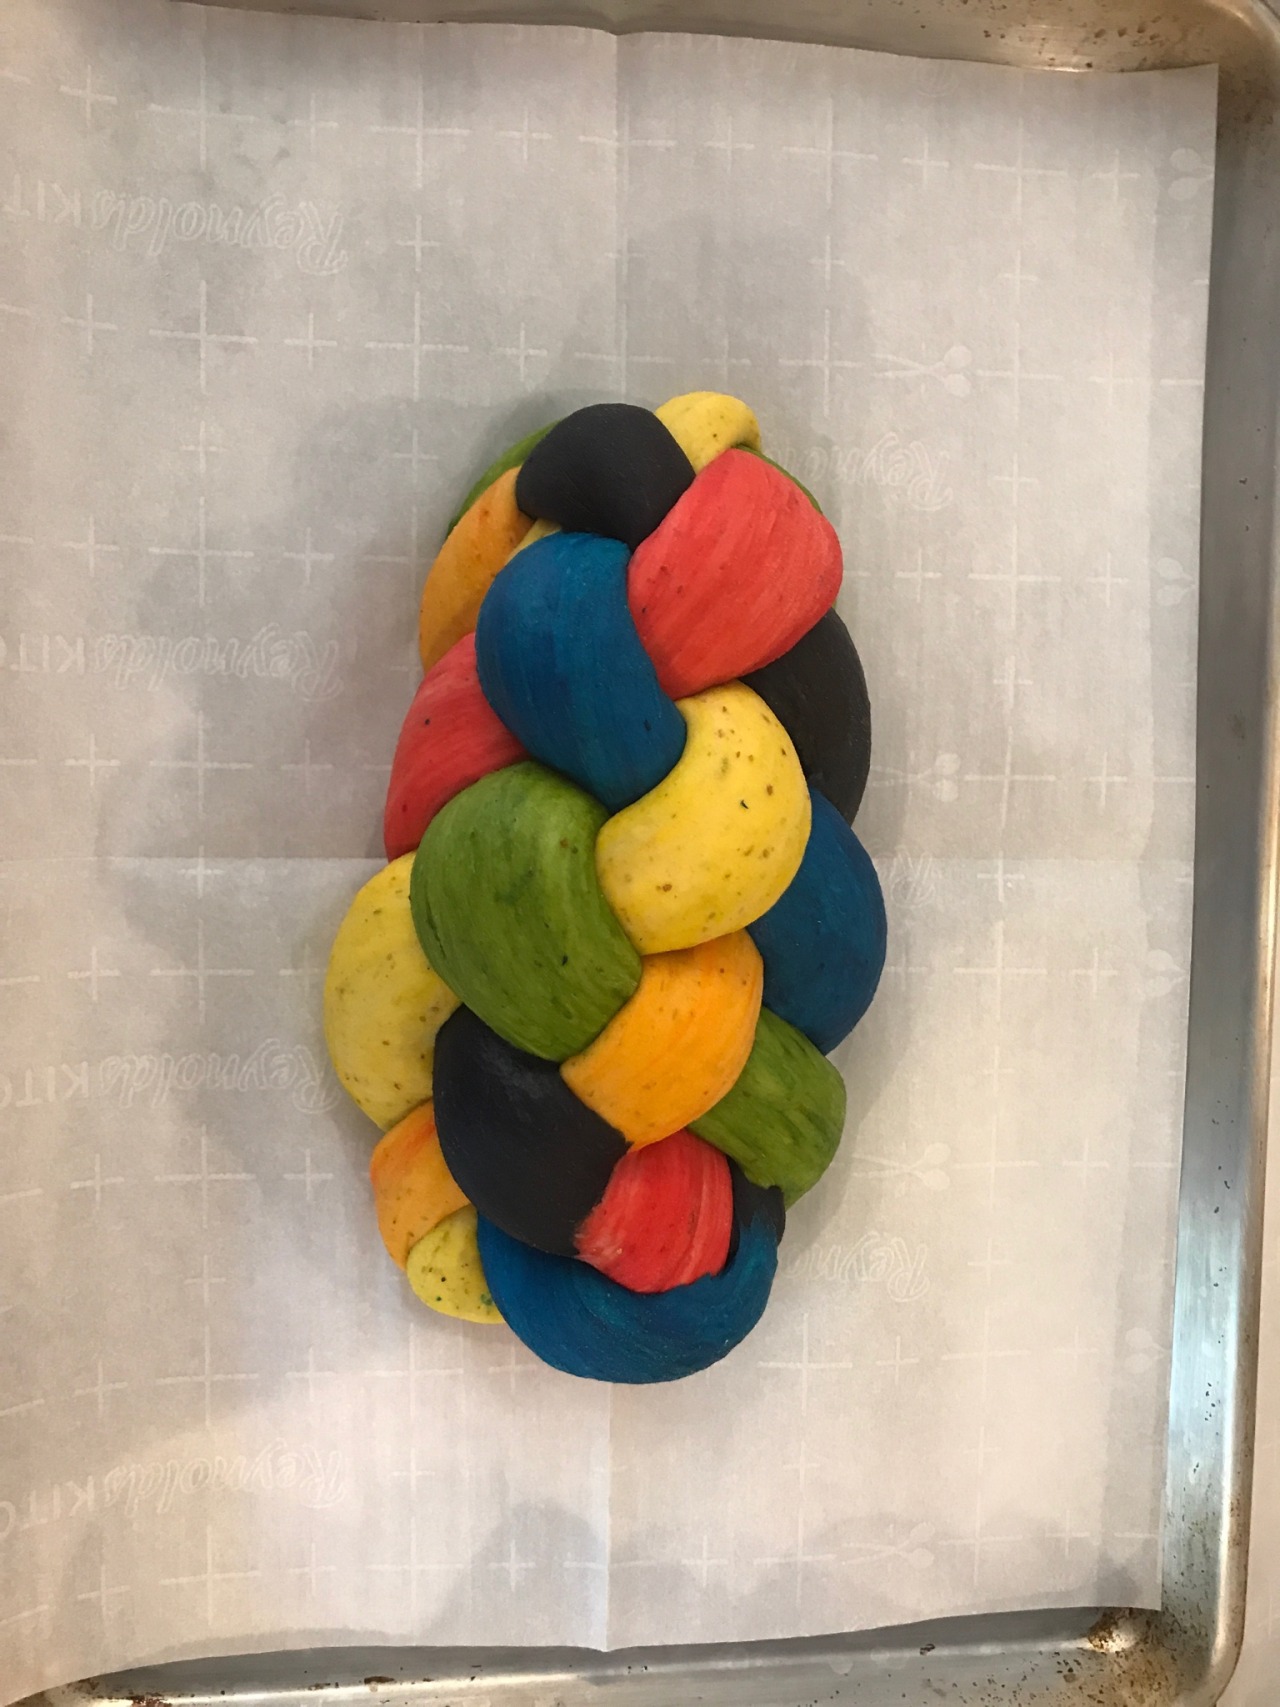 A colorful challah